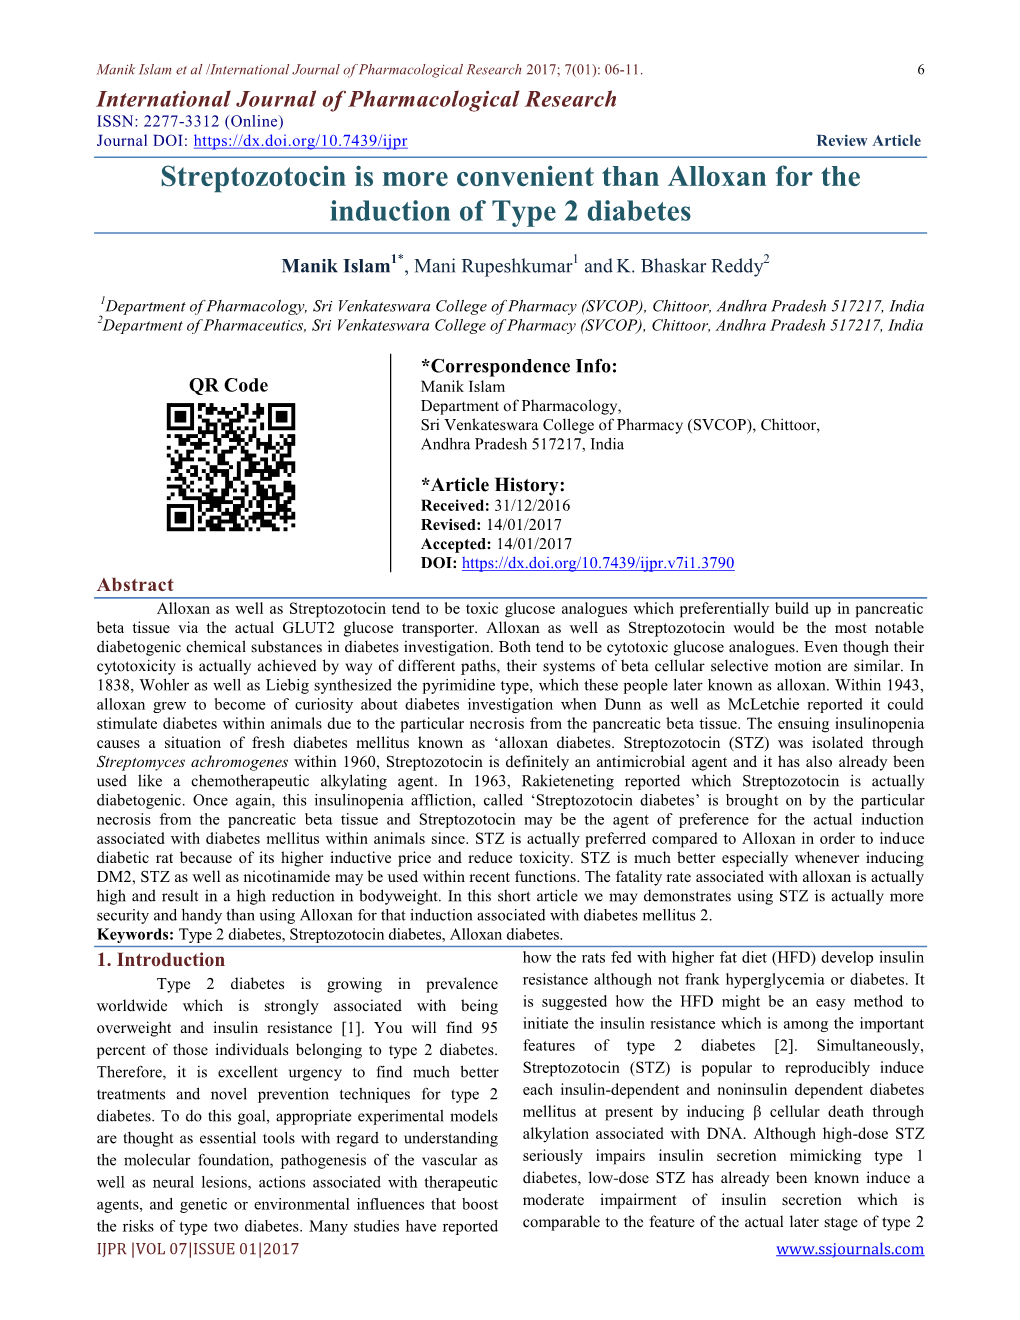 Streptozotocin Is More Convenient Than Alloxan for the Induction of Type 2 Diabetes